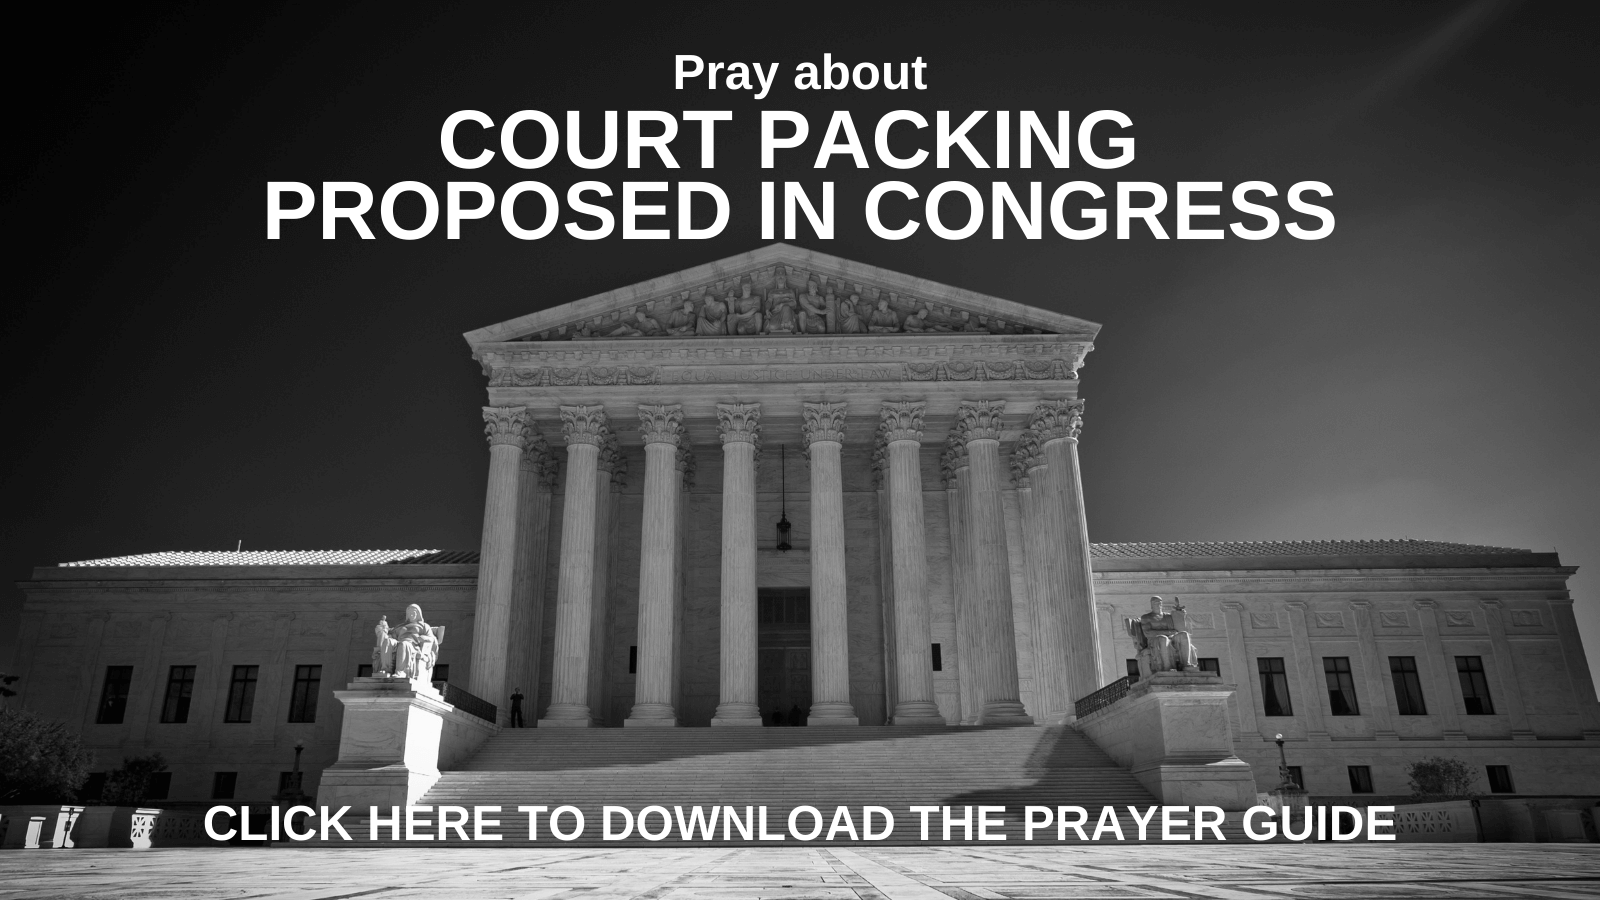 COURT PACKING MOVES FORWARD Intercessors for America